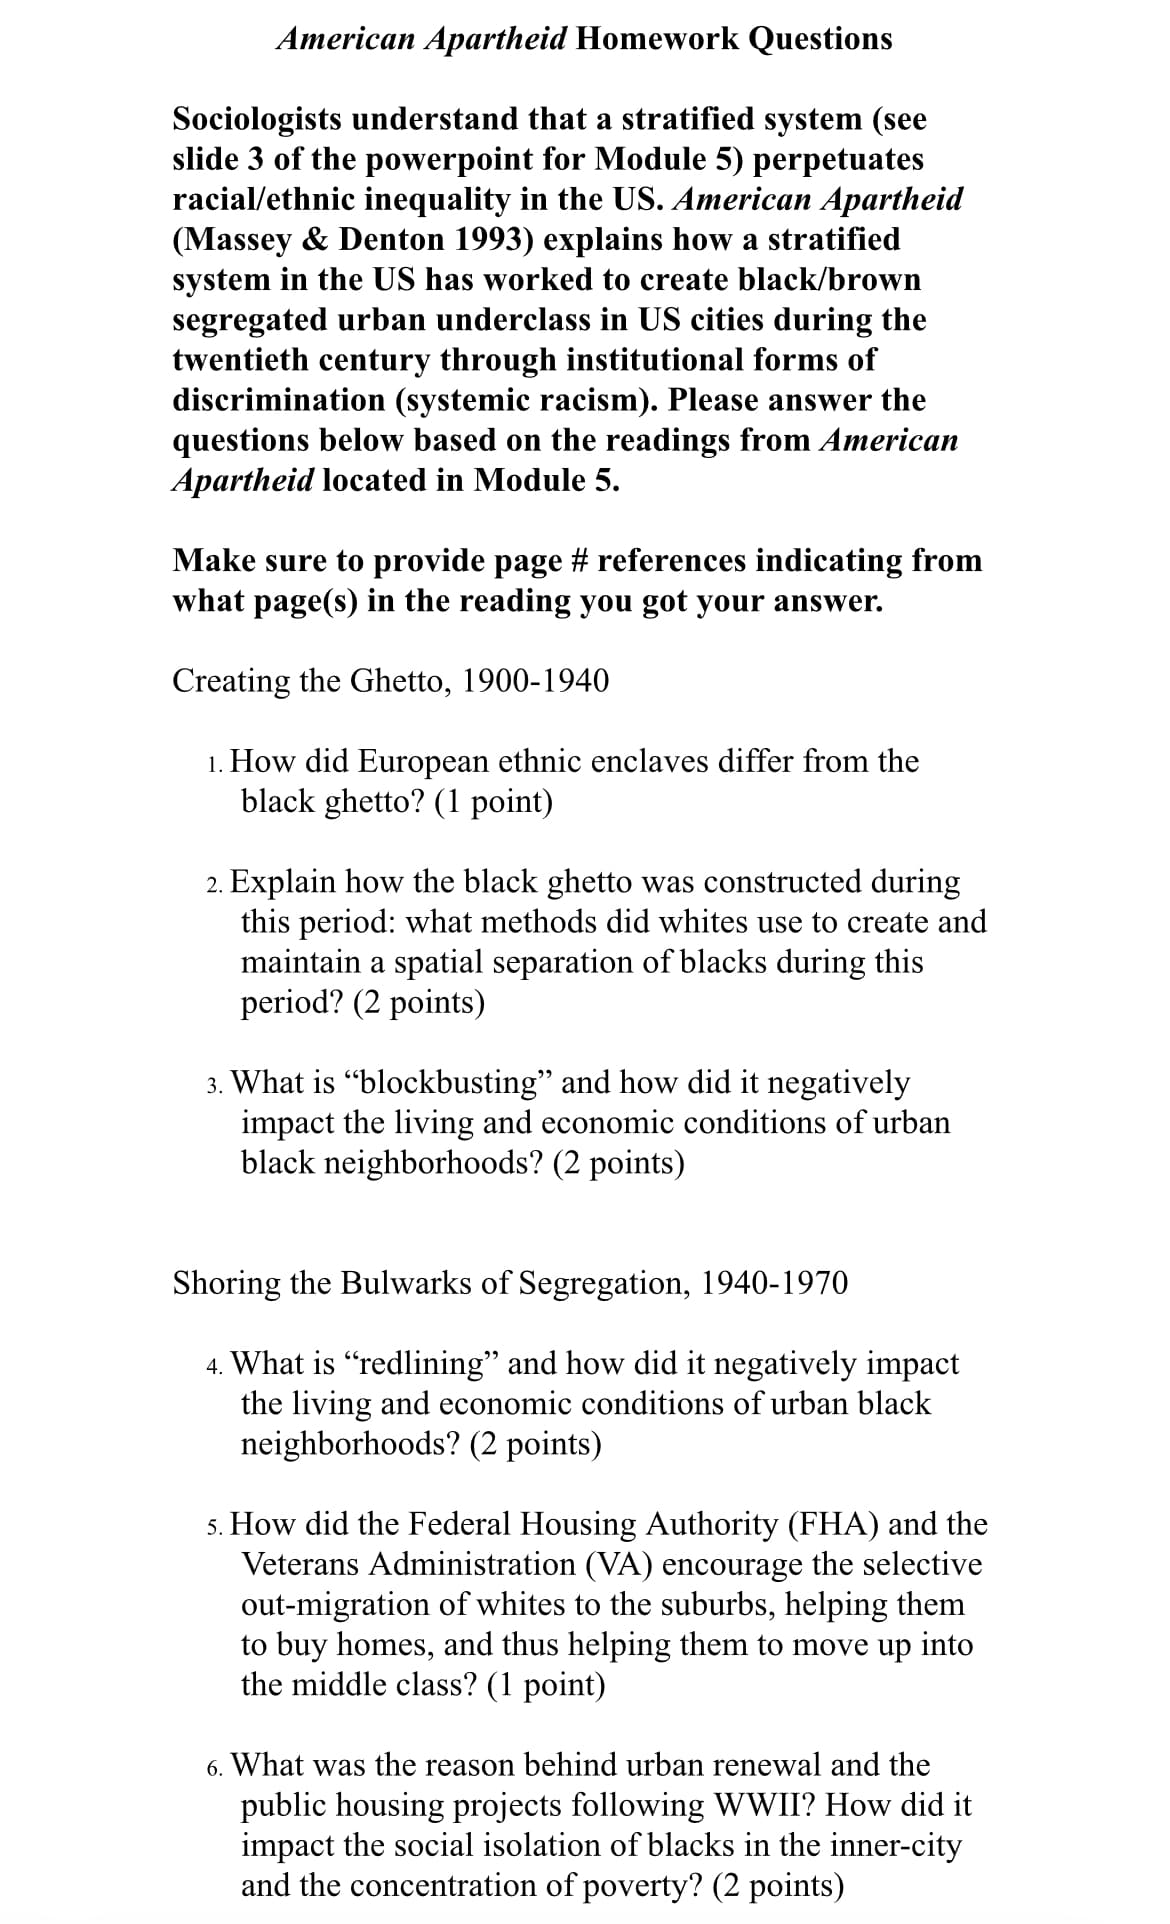 American Apartheid Homework Questions
Sociologists understand that a stratified system (see
slide 3 of the powerpoint for Module 5) perpetuates
racial/ethnic inequality in the US. American Apartheid
(Massey & Denton 1993) explains how a stratified
system in the US has worked to create black/brown
segregated urban underclass in US cities during the
twentieth century through institutional forms of
discrimination (systemic racism). Please answer the
questions below based on the readings from American
Apartheid located in Module 5.
Make sure to provide page # references indicating from
what page(s) in the reading you got your answer.
Creating the Ghetto, 1900-1940
1. How did European ethnic enclaves differ from the
black ghetto? (1 point)
2. Explain how the black ghetto was constructed during
this period: what methods did whites use to create and
maintain a spatial separation of blacks during this
period? (2 points)
3. What is "blockbusting" and how did it negatively
impact the living and economic conditions of urban
black neighborhoods? (2 points)
Shoring the Bulwarks of Segregation, 1940-1970
4. What is "redlining" and how did it negatively impact
the living and economic conditions of urban black
neighborhoods? (2 points)
5. How did the Federal Housing Authority (FHA) and the
Veterans Administration (VA) encourage the selective
out-migration of whites to the suburbs, helping them
to buy homes, and thus helping them to move up into
the middle class? (1 point)
6. What was the reason behind urban renewal and the
public housing projects following WWII? How did it
impact the social isolation of blacks in the inner-city
and the concentration of poverty? (2 points)